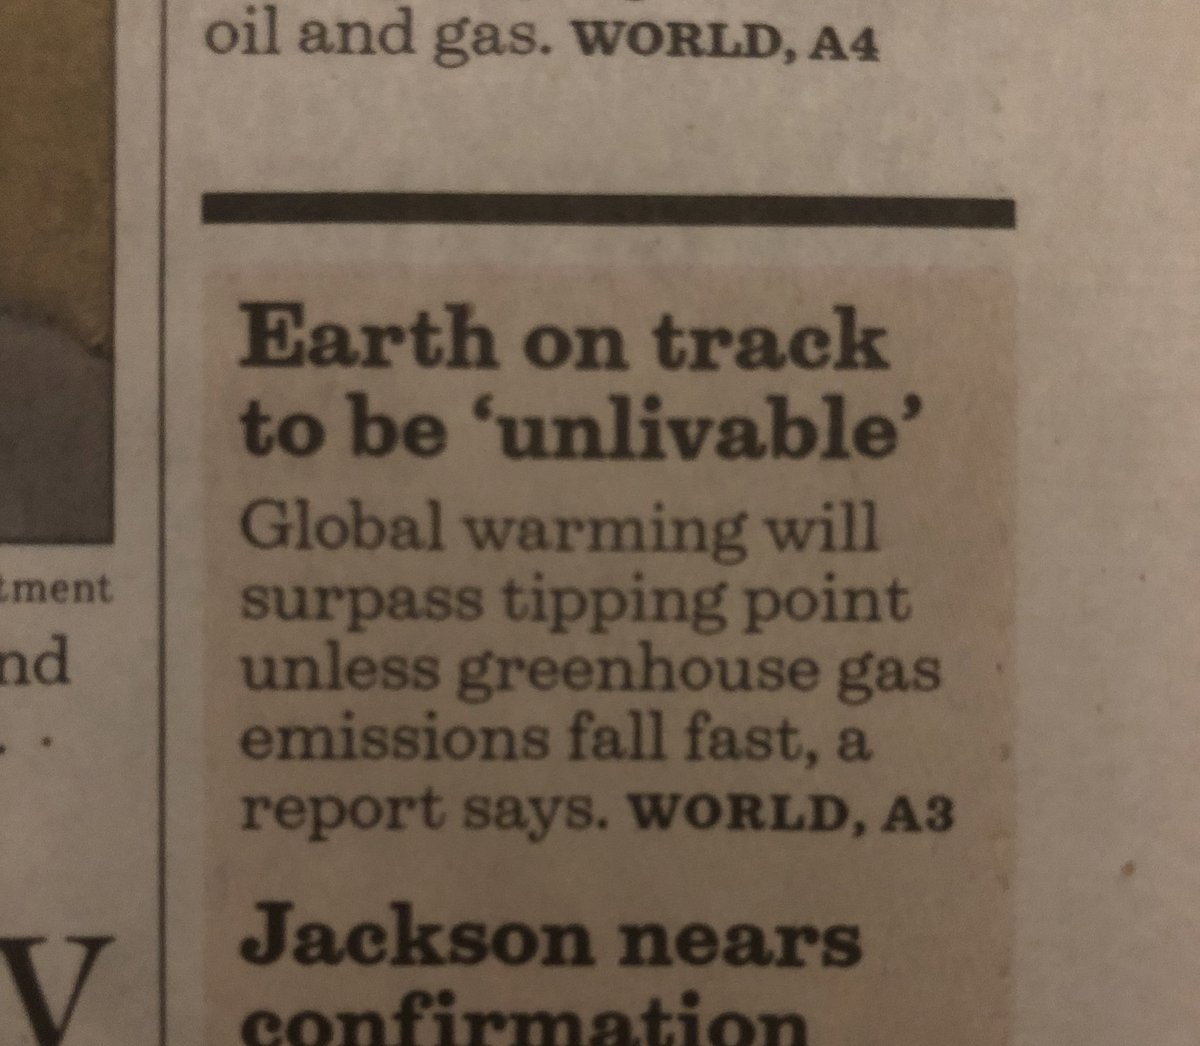 Earth on track to be unlivable. Story, page 3. You can’t make this up